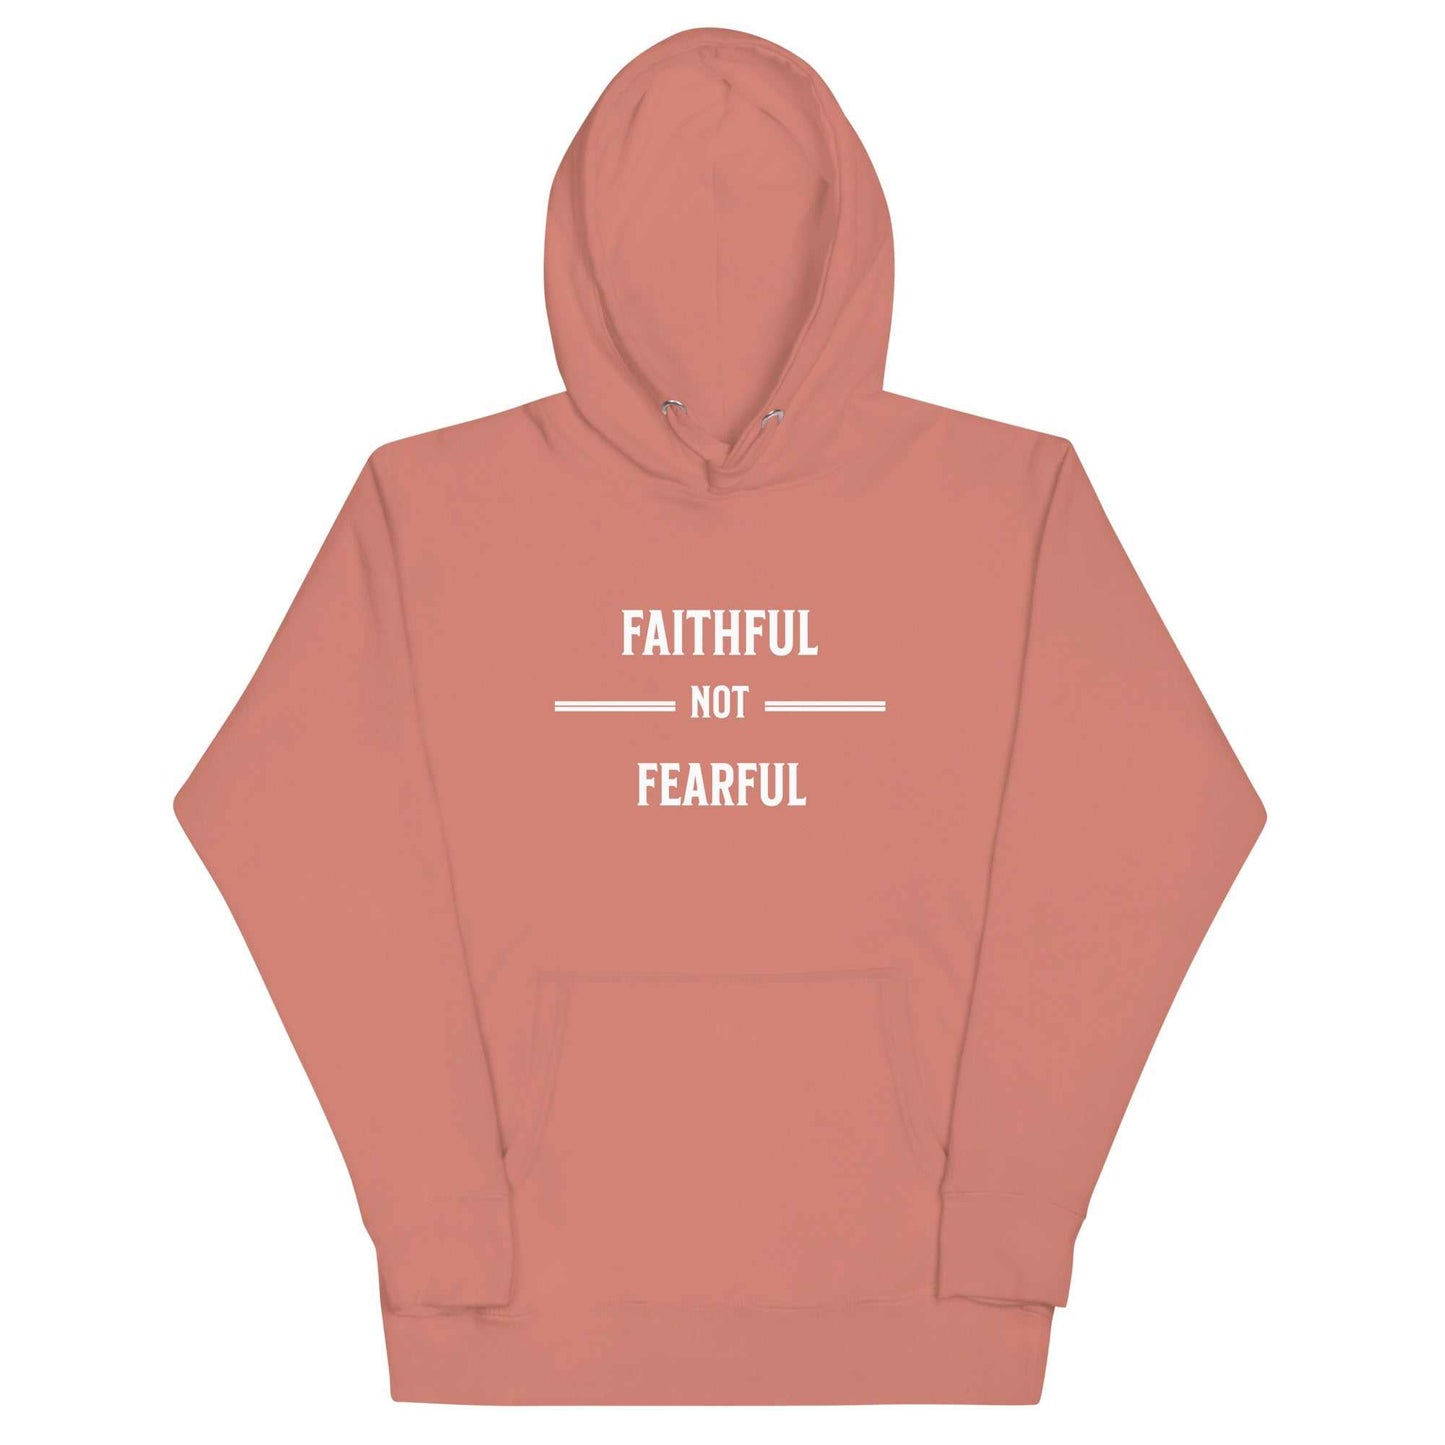 Faithful Not Fearful Unisex Hoodie - White Ltrs.